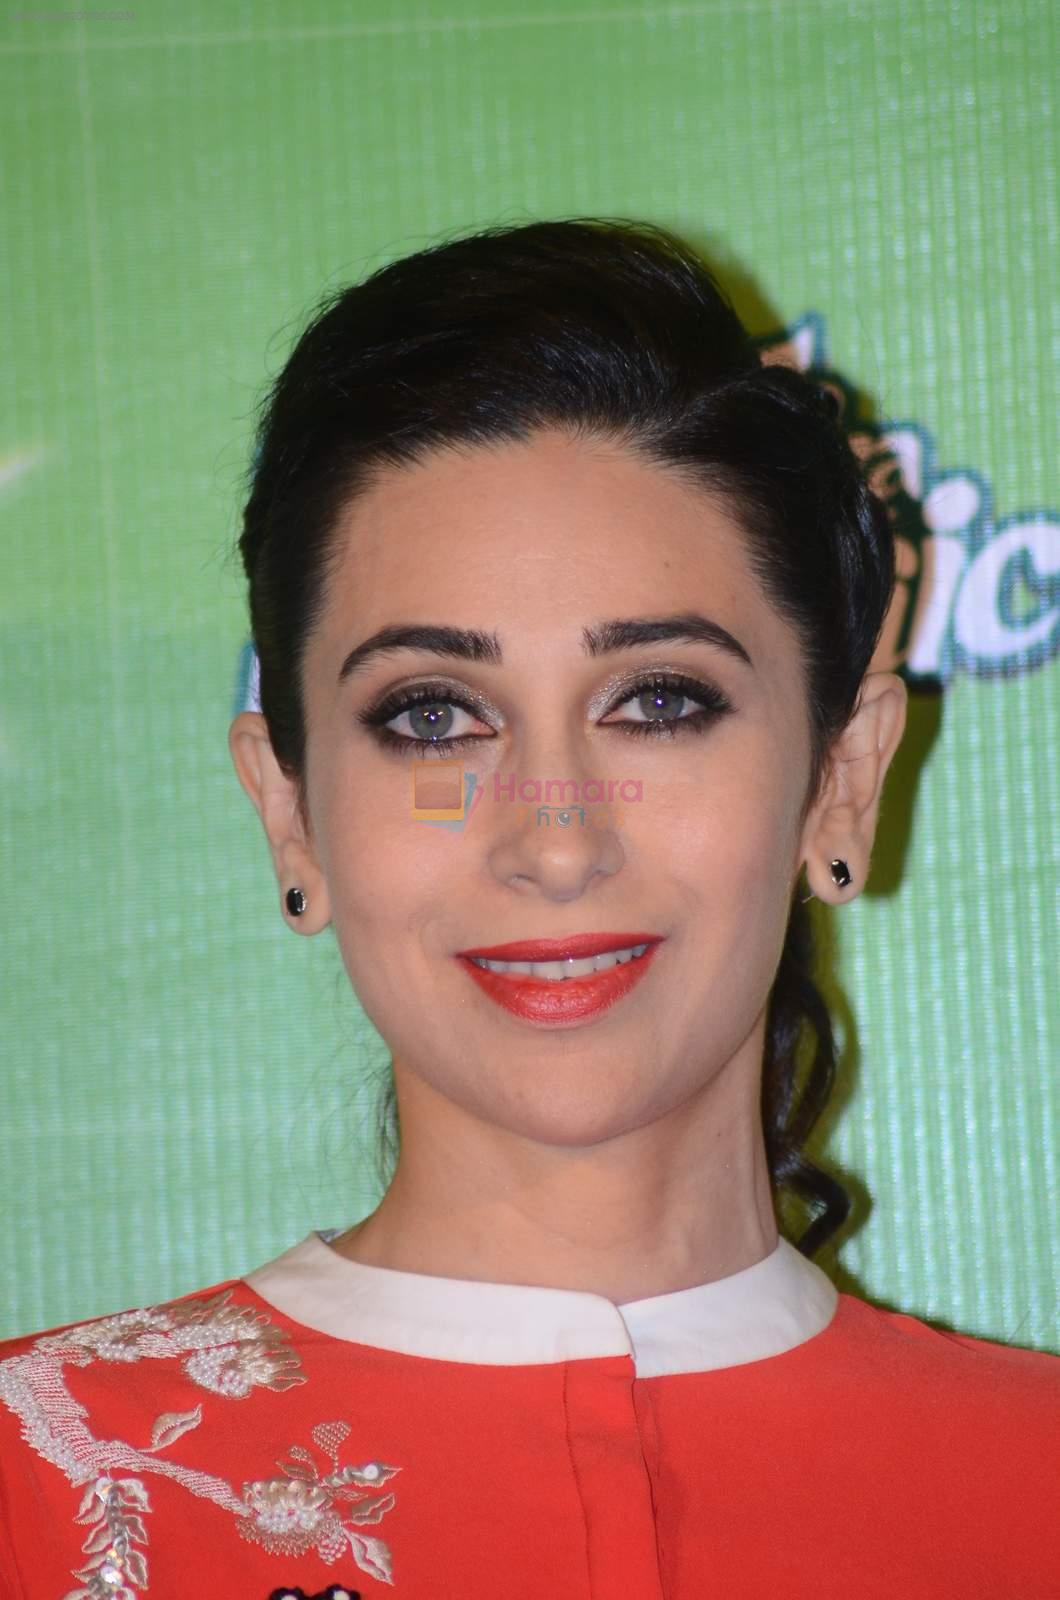 Karisma Kapoor at Mccain promotional event on 15th Dec 2015